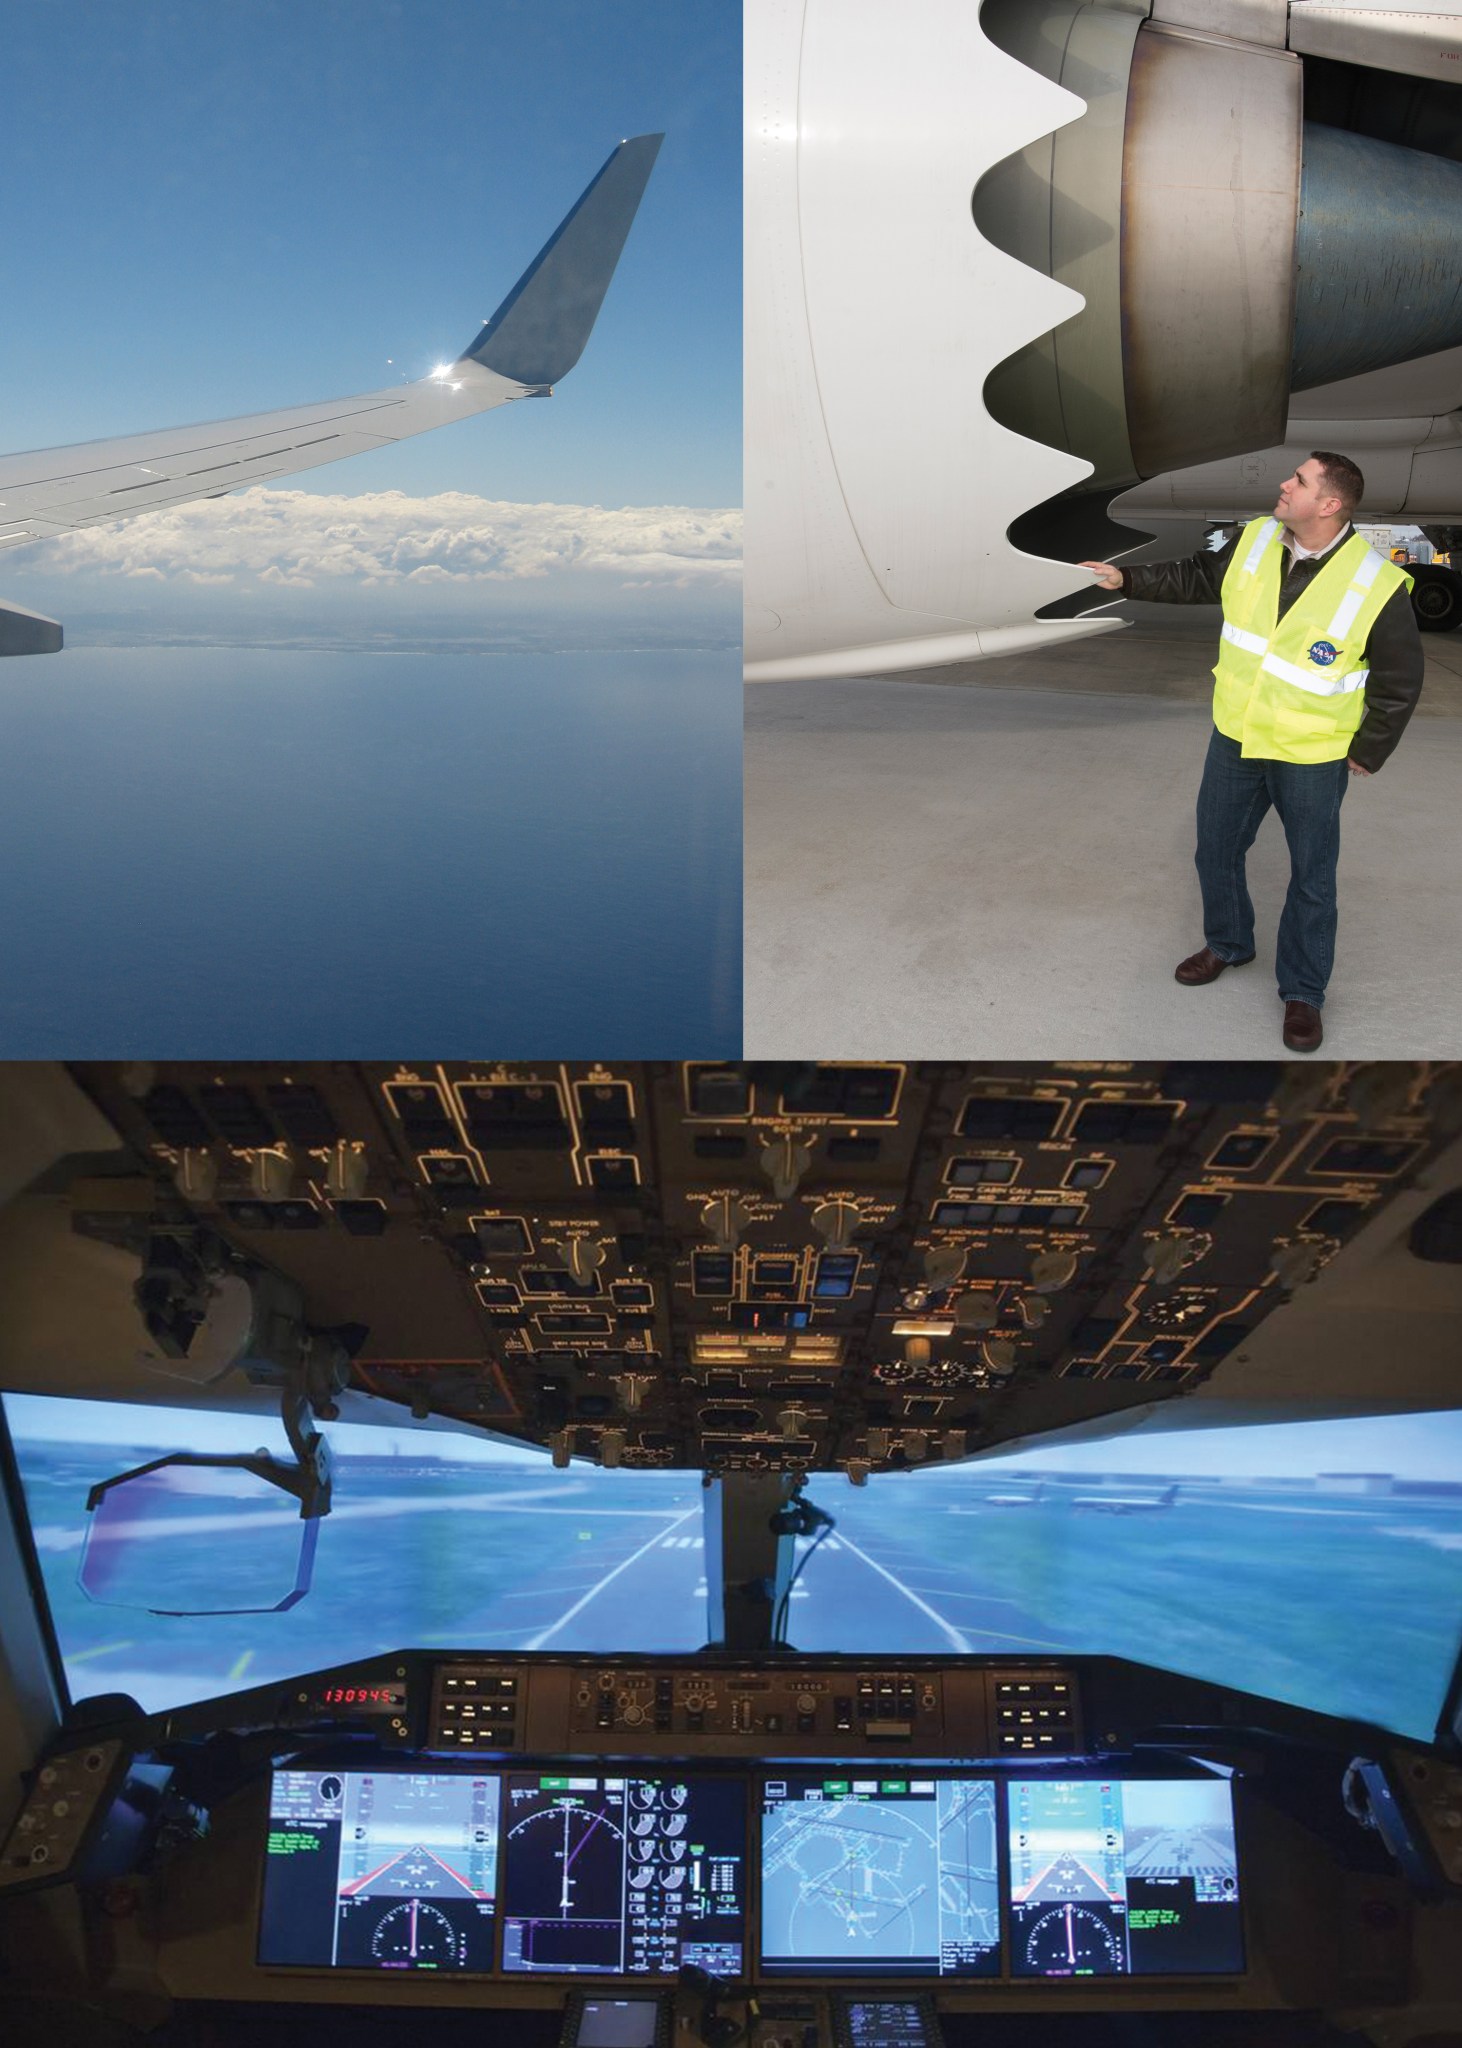 NASA technology on airplanes image montage. Top left: winglets, Top right: chevrons, Bottom: glass cockpit.